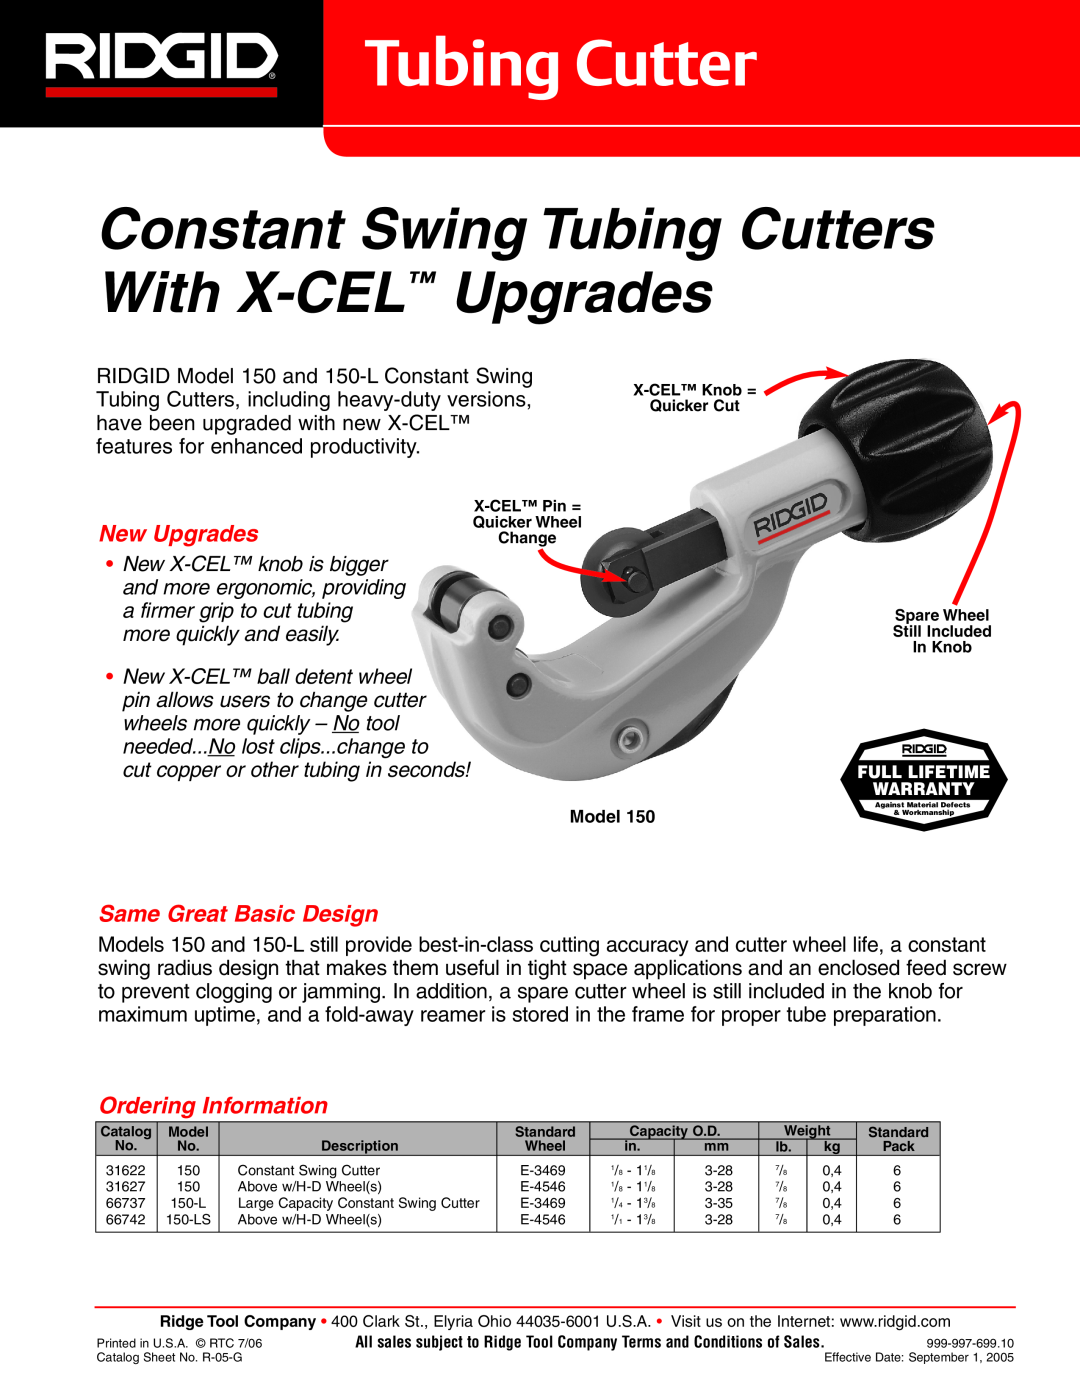 RIDGID DC177 warranty Constant Swing Tubing Cutters With X-CEL Upgrades, New Upgrades, Same Great Basic Design 